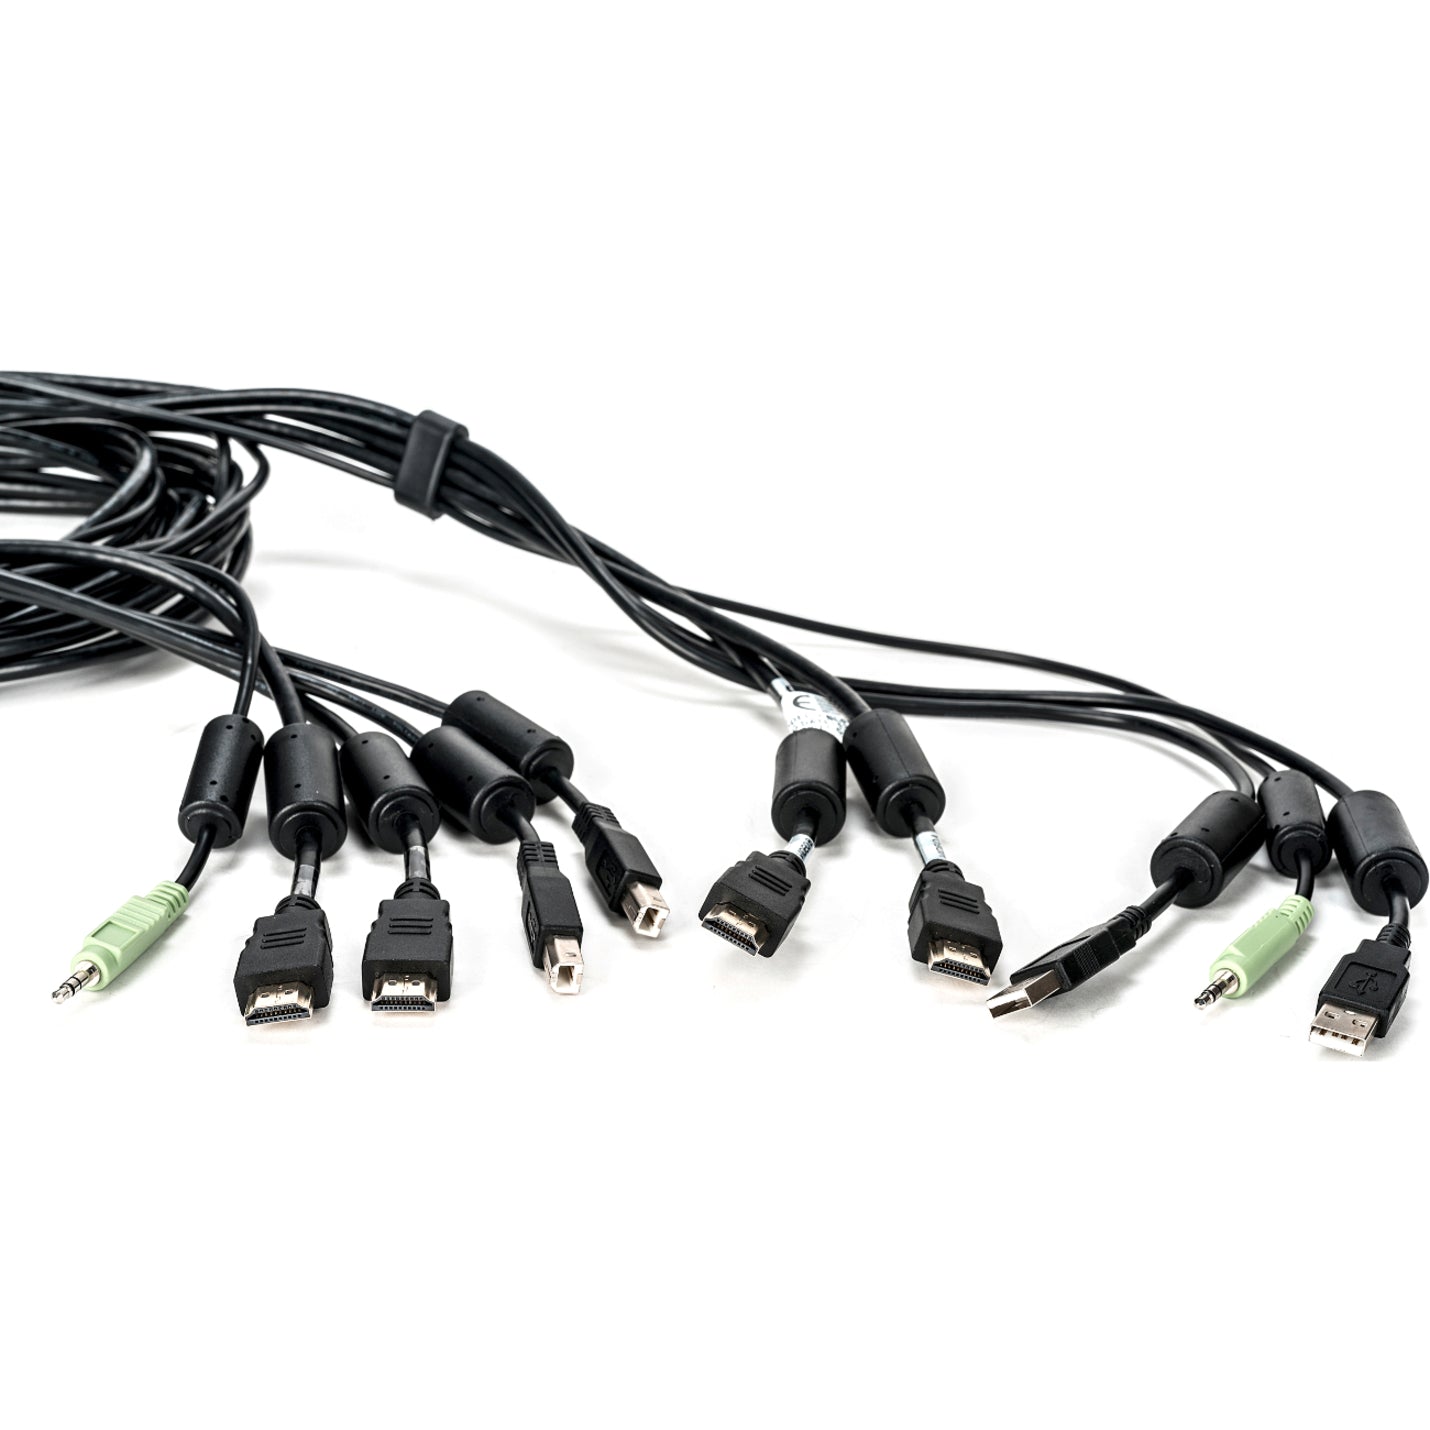 AVOCENT CBL0117 KVM Cable, Dual HDMI and Audio, 10 ft. for Vertiv Avocent SV and SC Series Switches